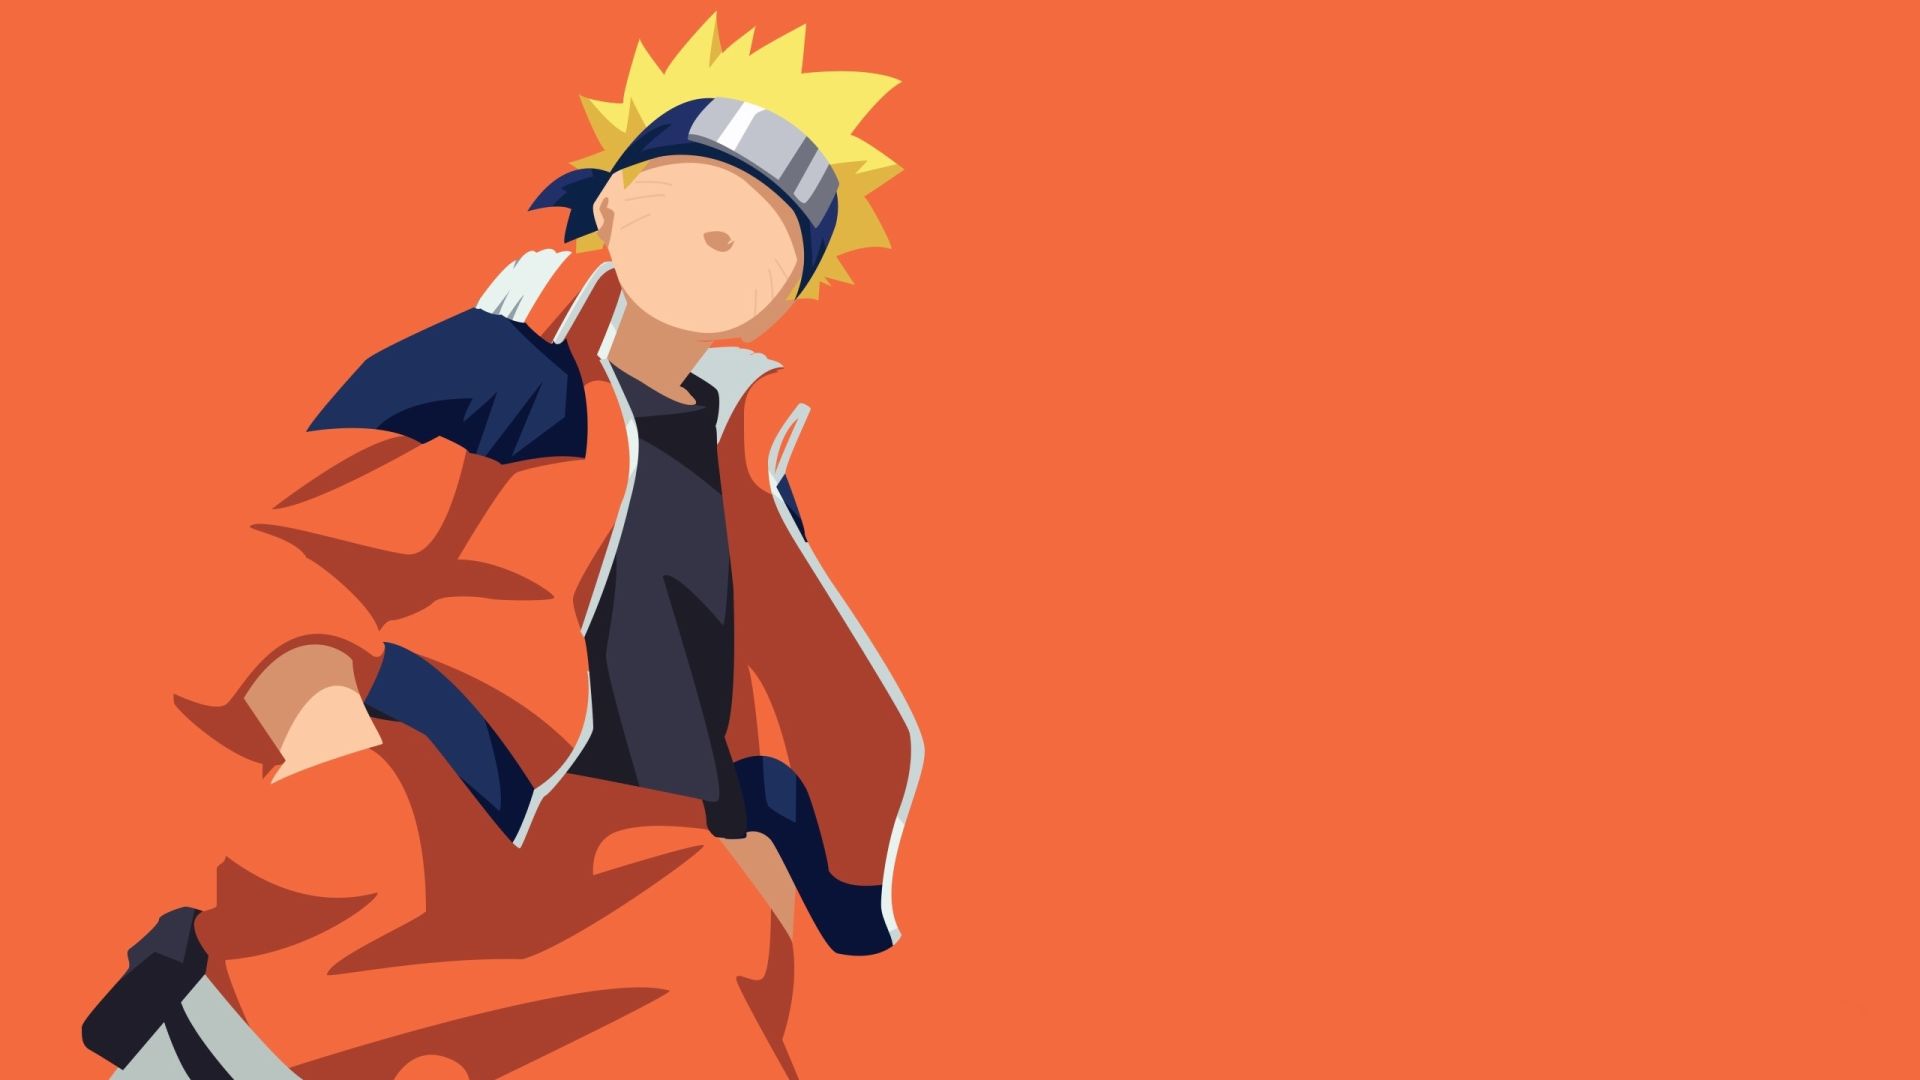 Naruto For Computer Wallpapers